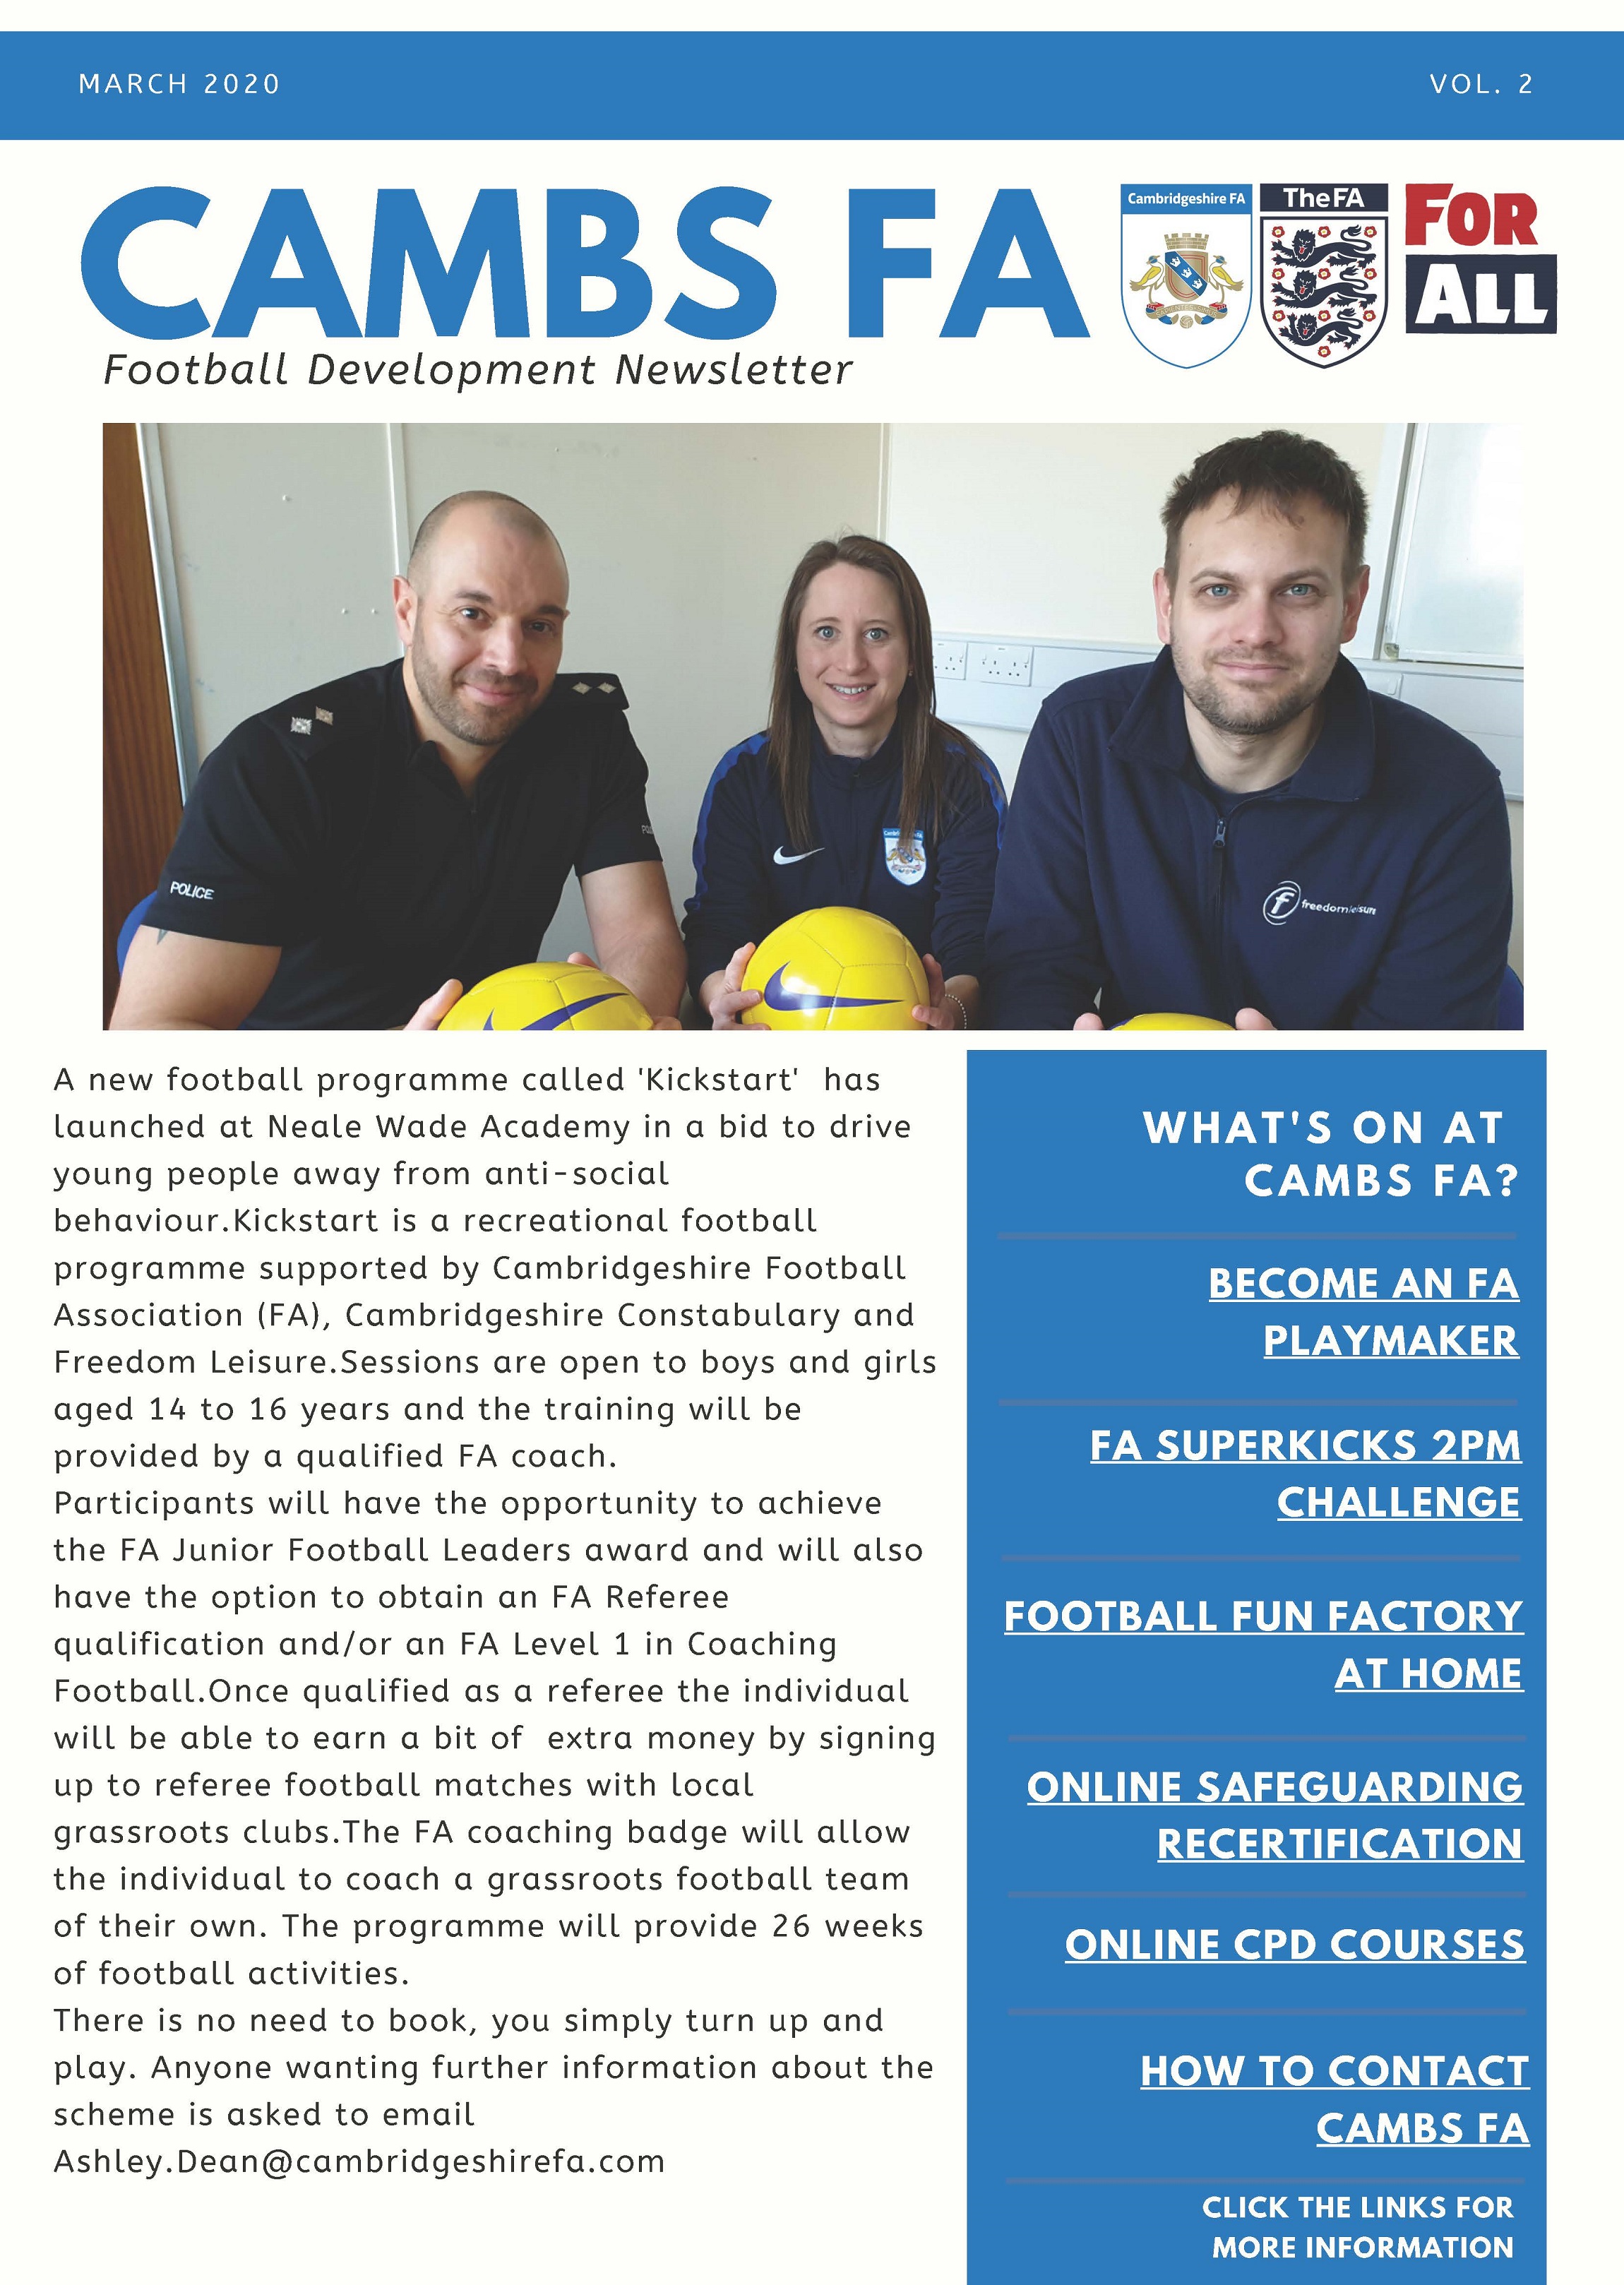 Cambs FA Dev Newsletter - March 2020